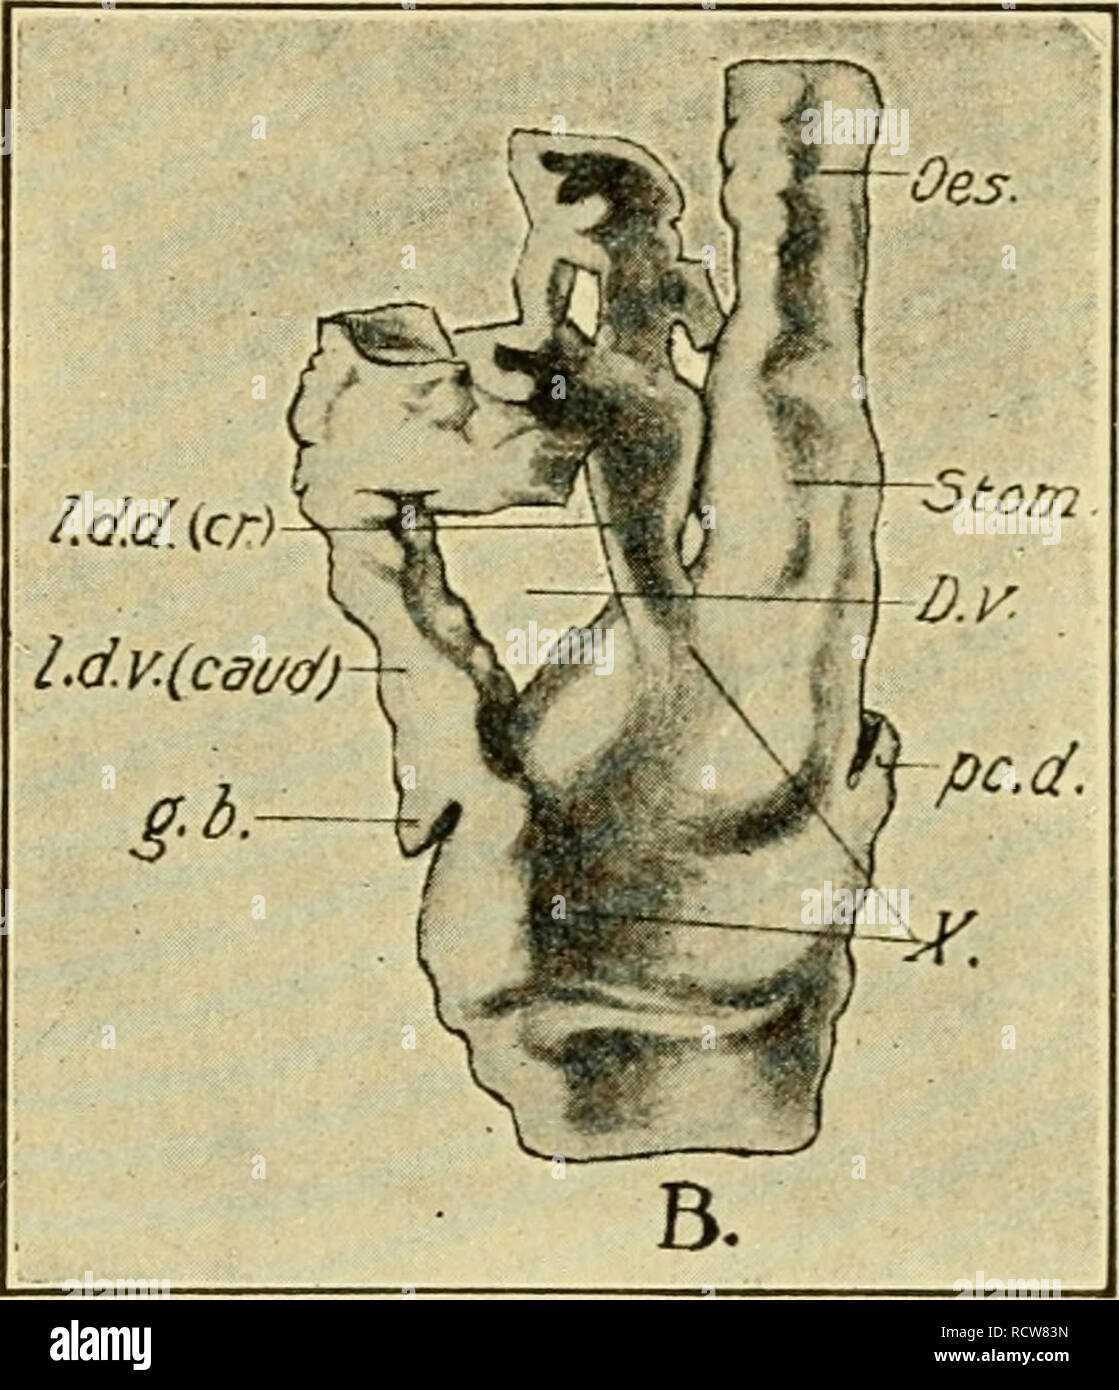 . The development of the chick : an introduction to embryology. Embryology; Chickens -- Embryos. FROM TWELVE TO THIRTY-SIX SOMITES 179 floor of the laiyngotracheal groove directl}^ continuous with the floor of the branchial portion of the pharynx at its hind end; the former bends up at about right angles to enter the narrow oesophagus (Figs. 87 and 88). Thus the whole pulmonary tract communicates widely with the pharynx at the 35 s stage. Its complete delimination falls within the period covered by Chapter X. The continuity of the expansions that form the lung primordia, with the series of vis Stock Photo